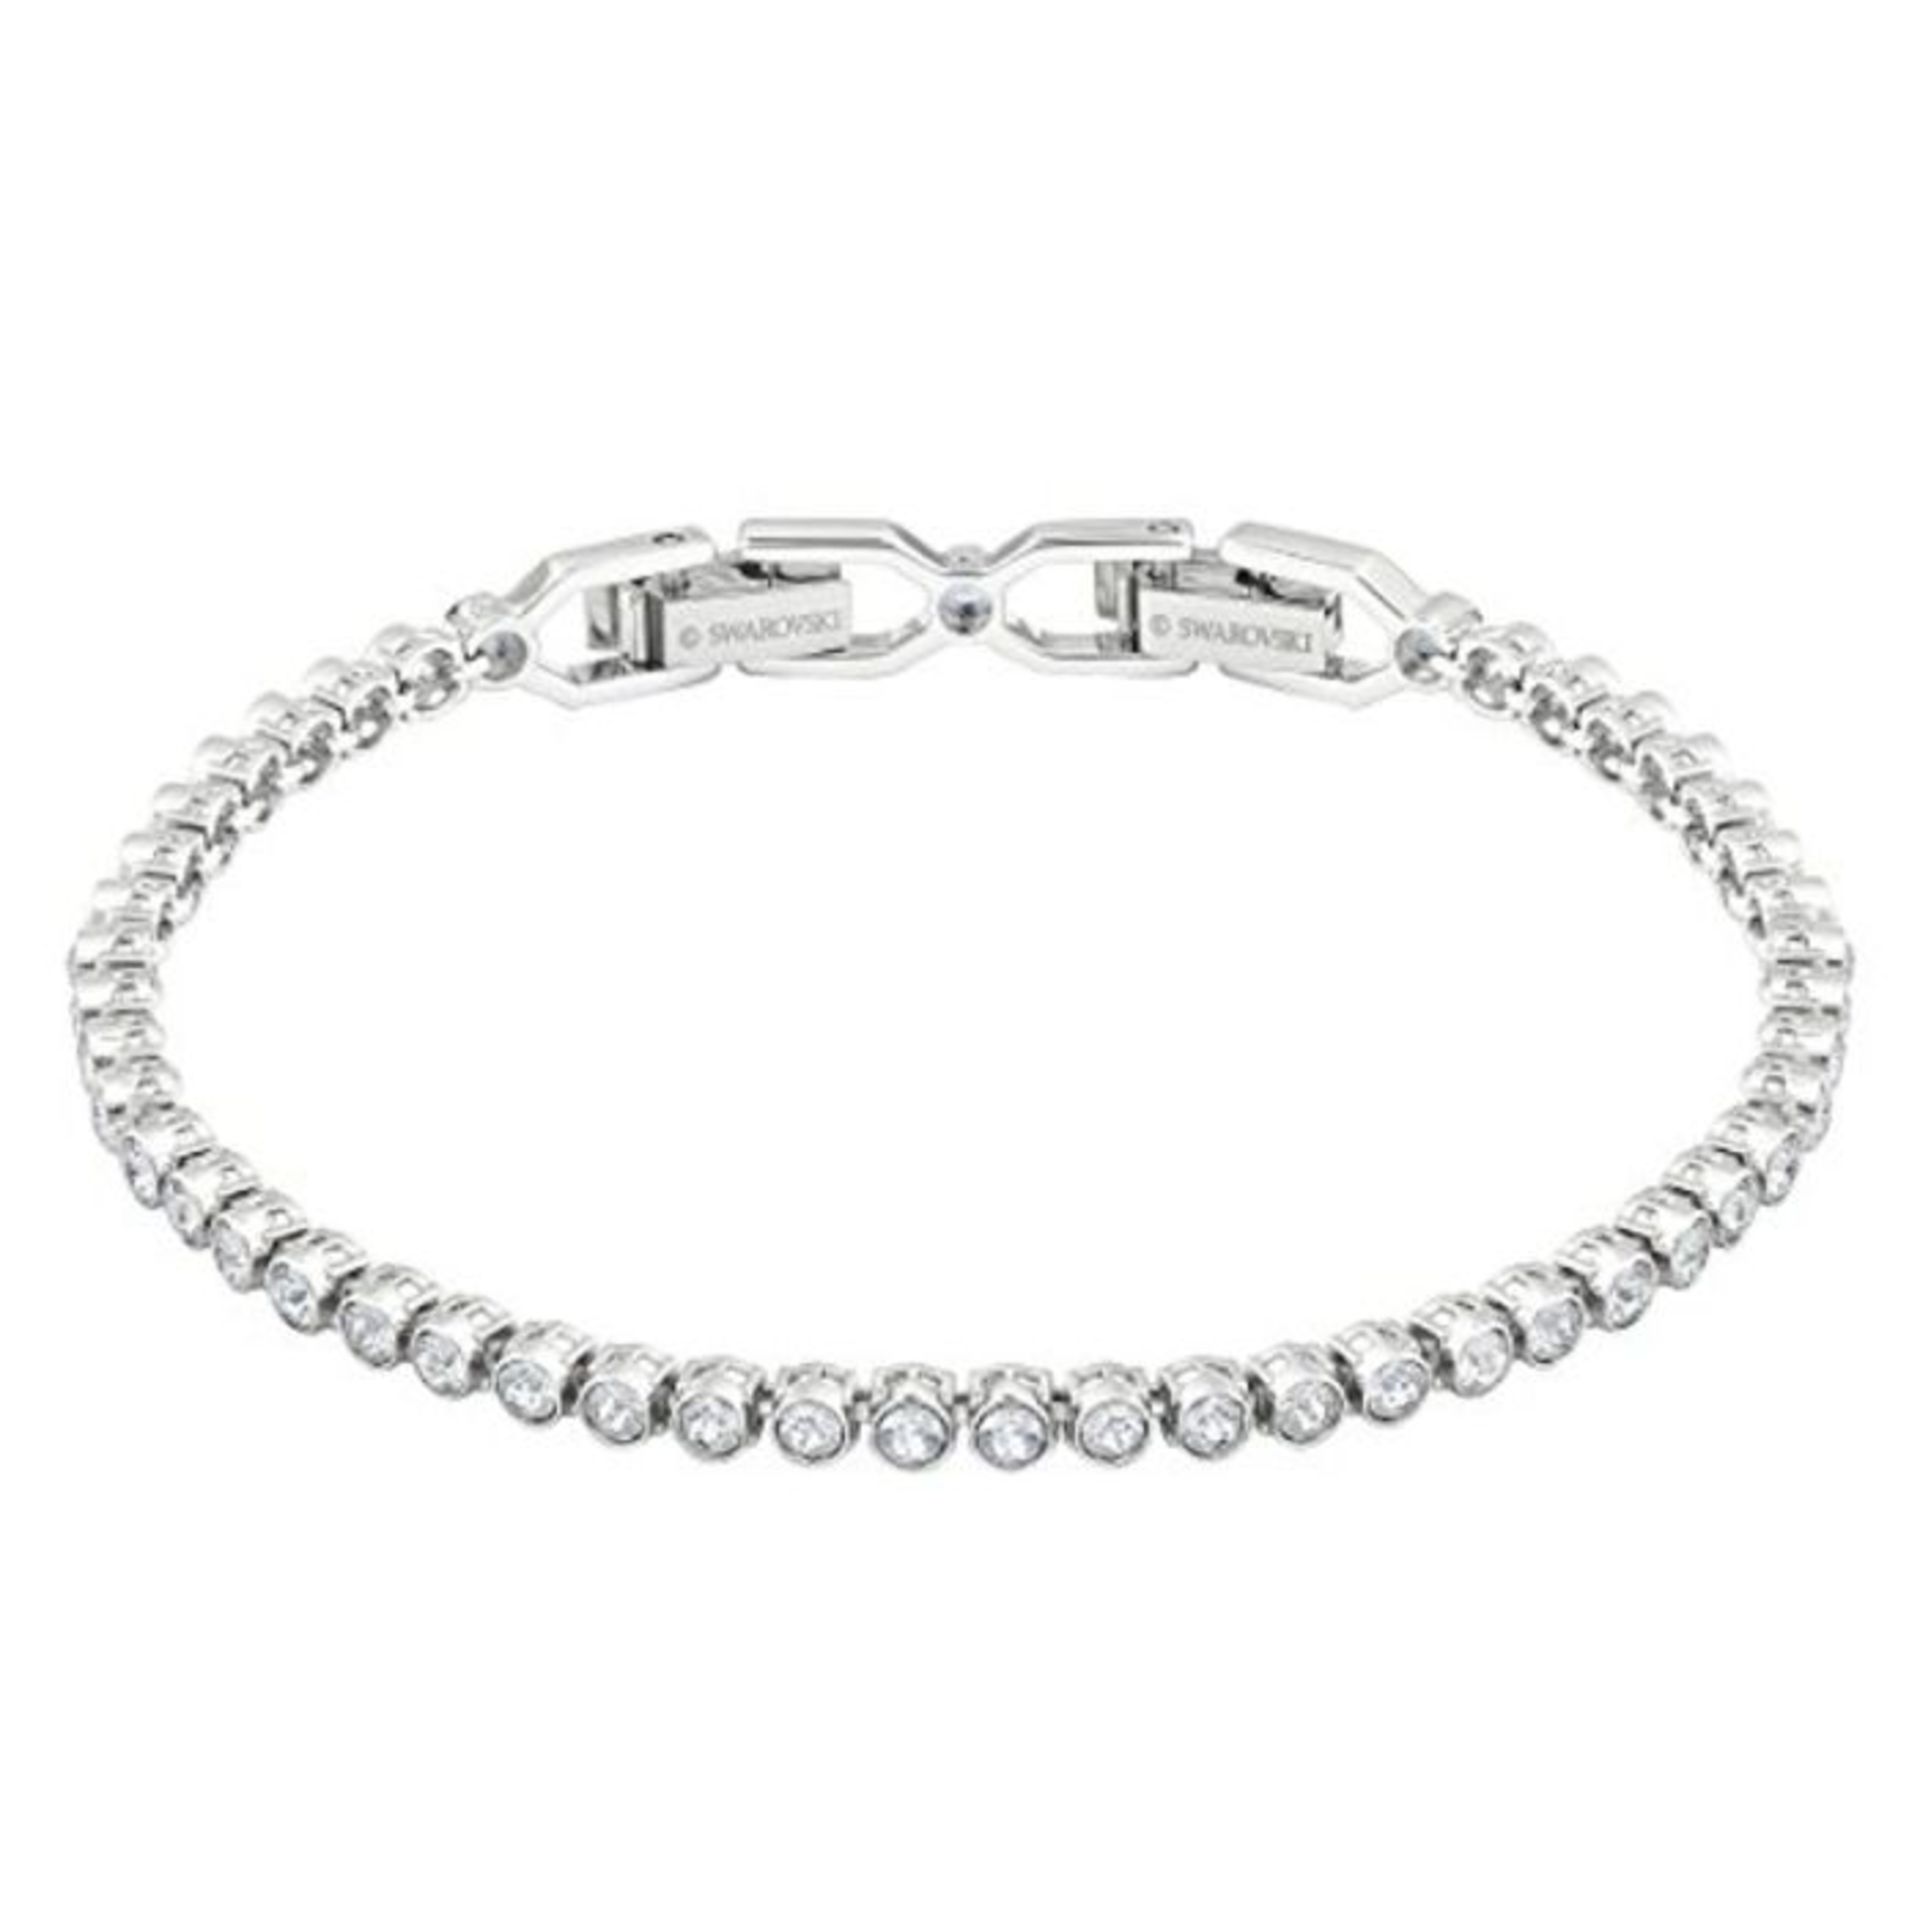 RRP £76.00 Swarovski Women's Emily Bracelet Brilliant White Crystals with Rhodium Plating from th